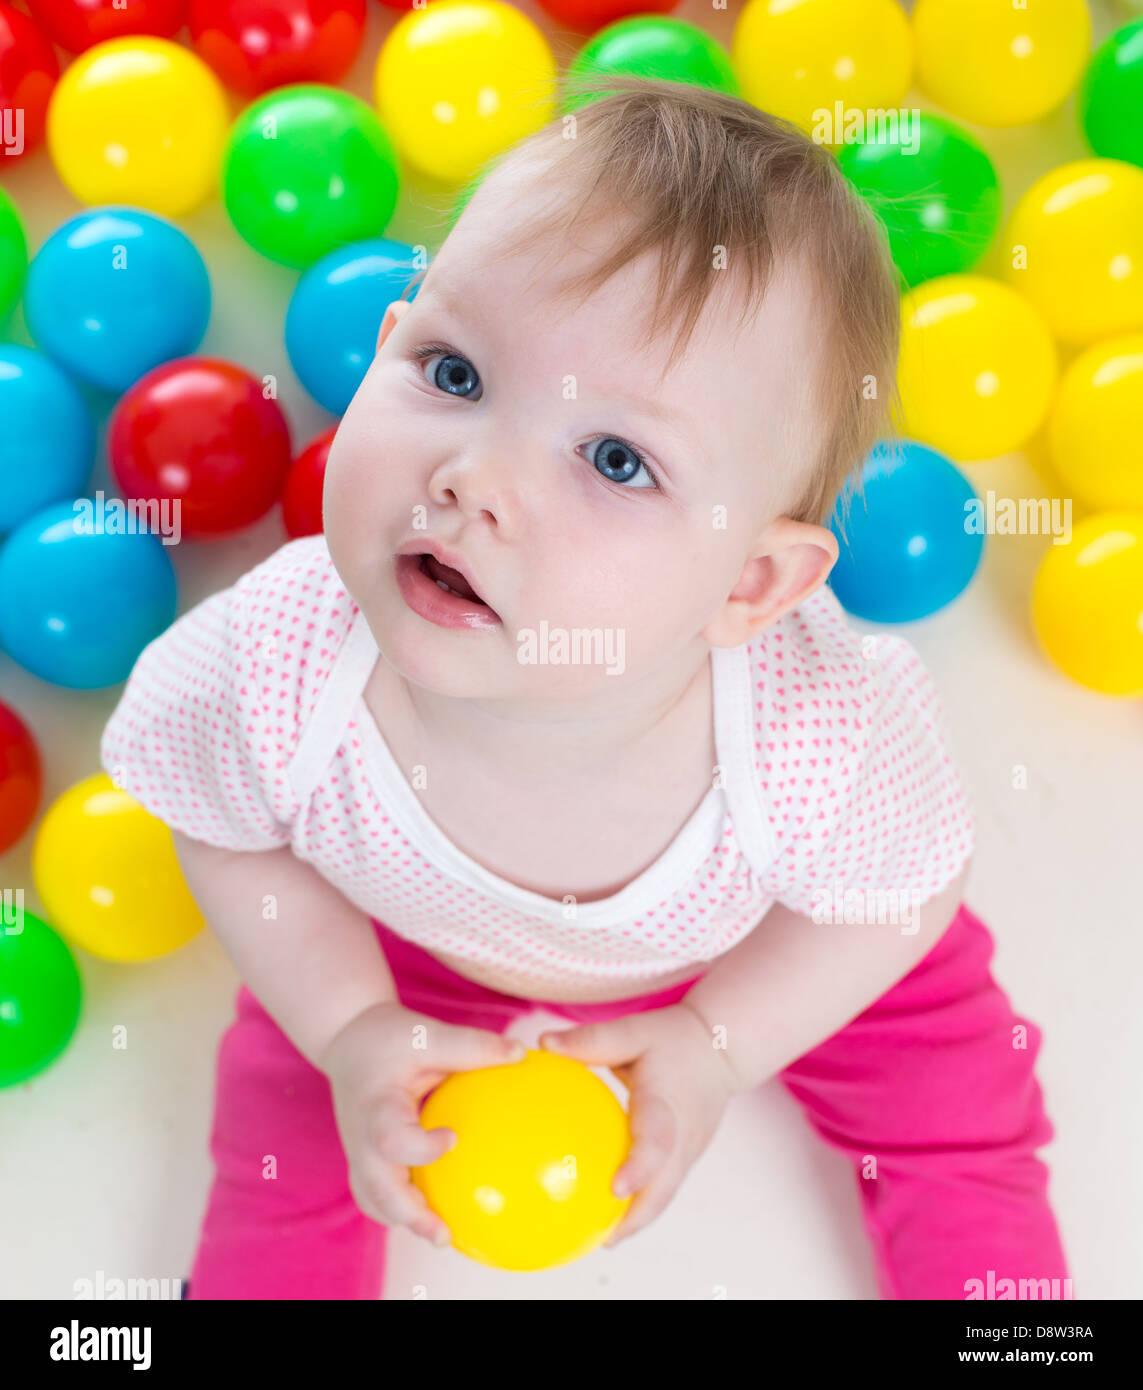 Top view of baby girl playing with colorful balls Stock Photo